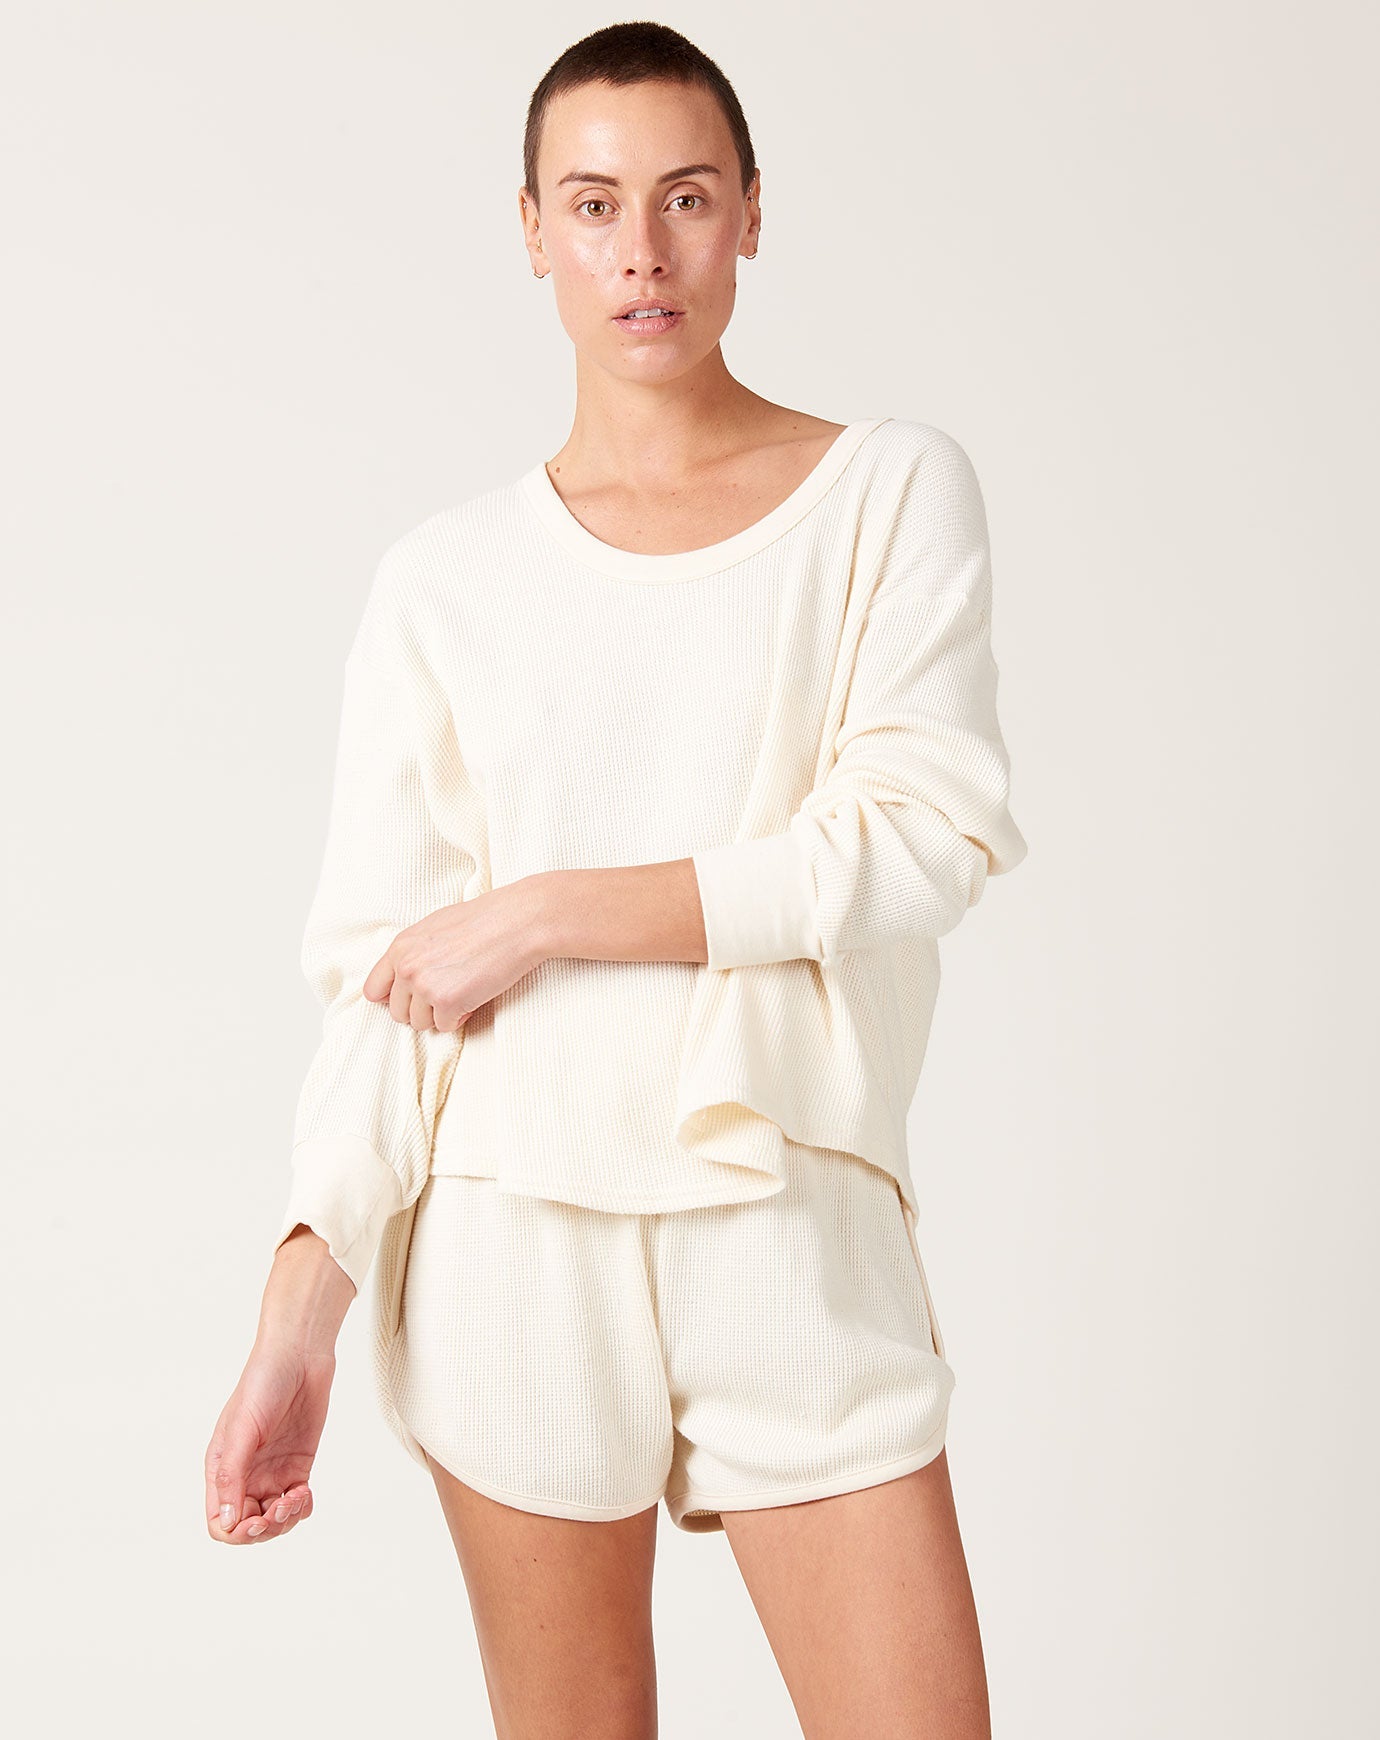 Wol Hide Trainer Short in Natural